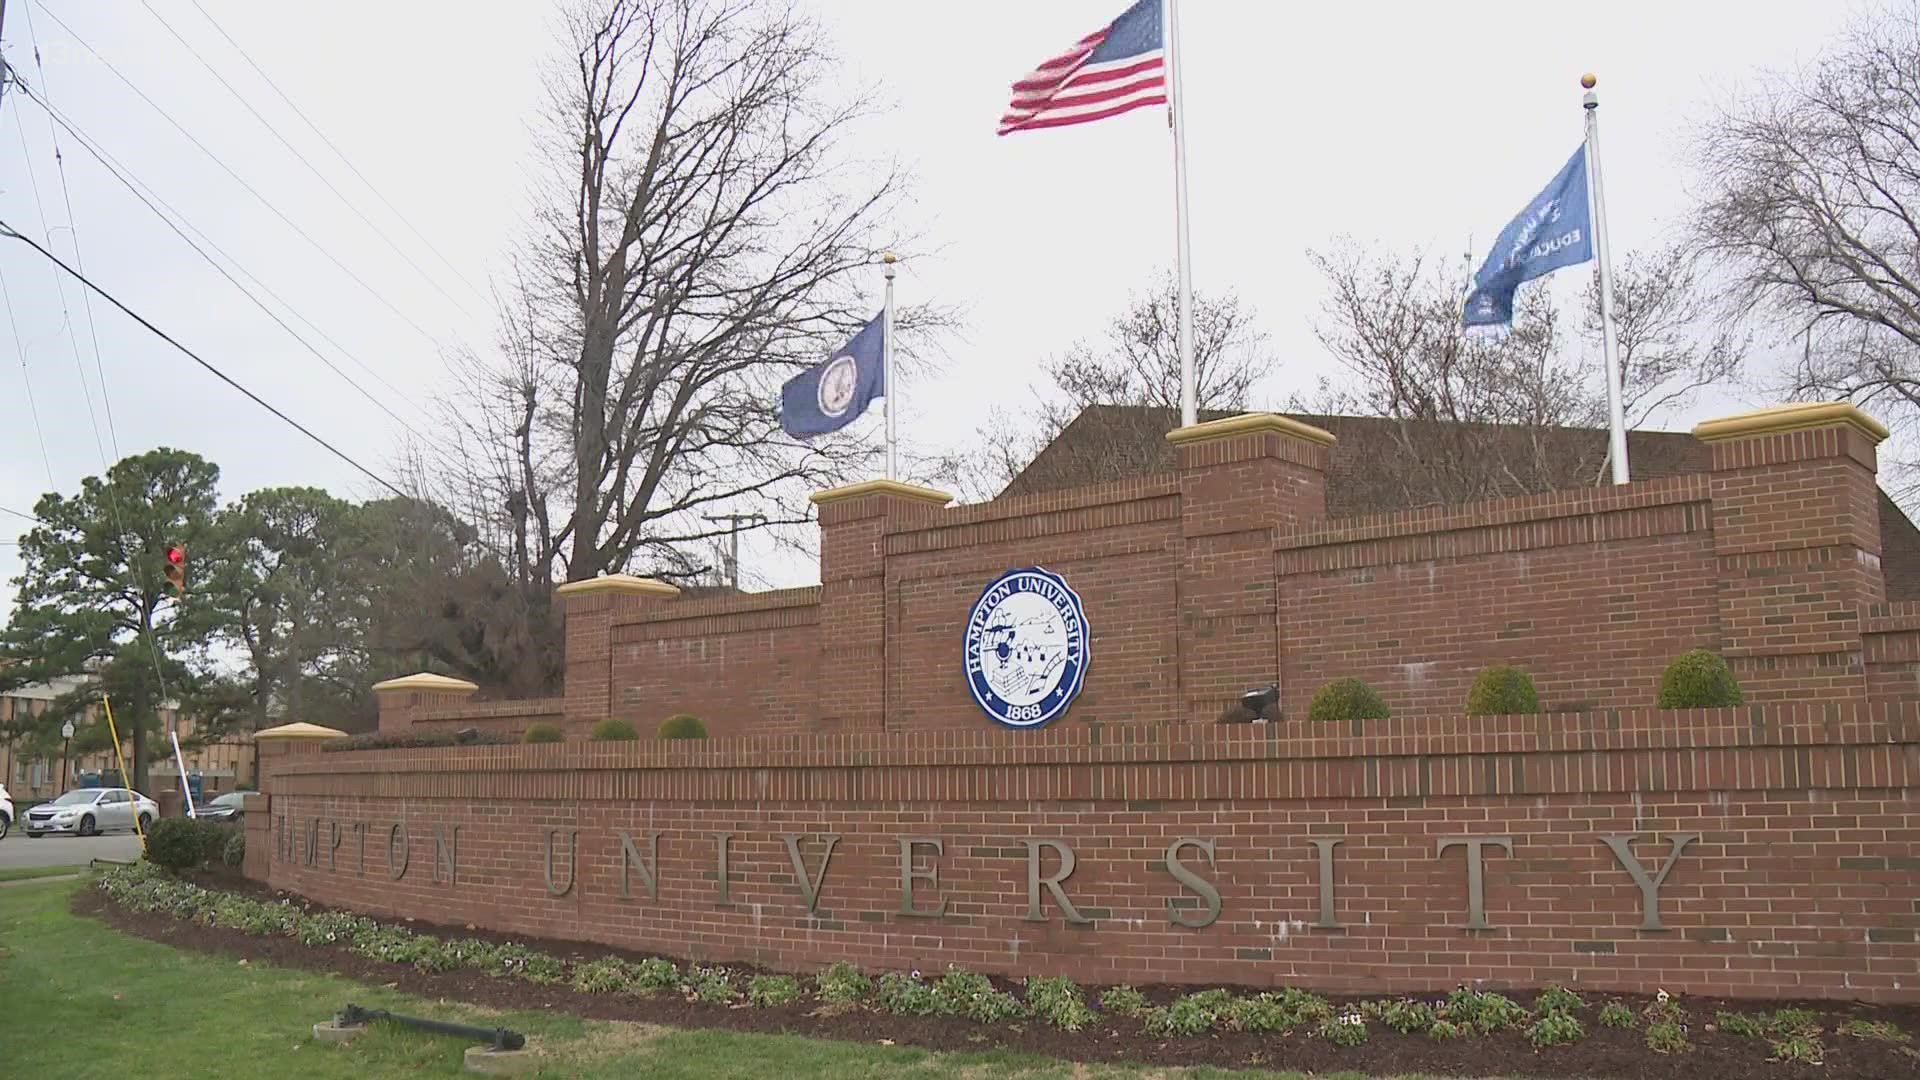 Hampton University is one of three Historically Black Colleges and Universities awarded money from Project SERV, a U.S. Department of Education initiative.